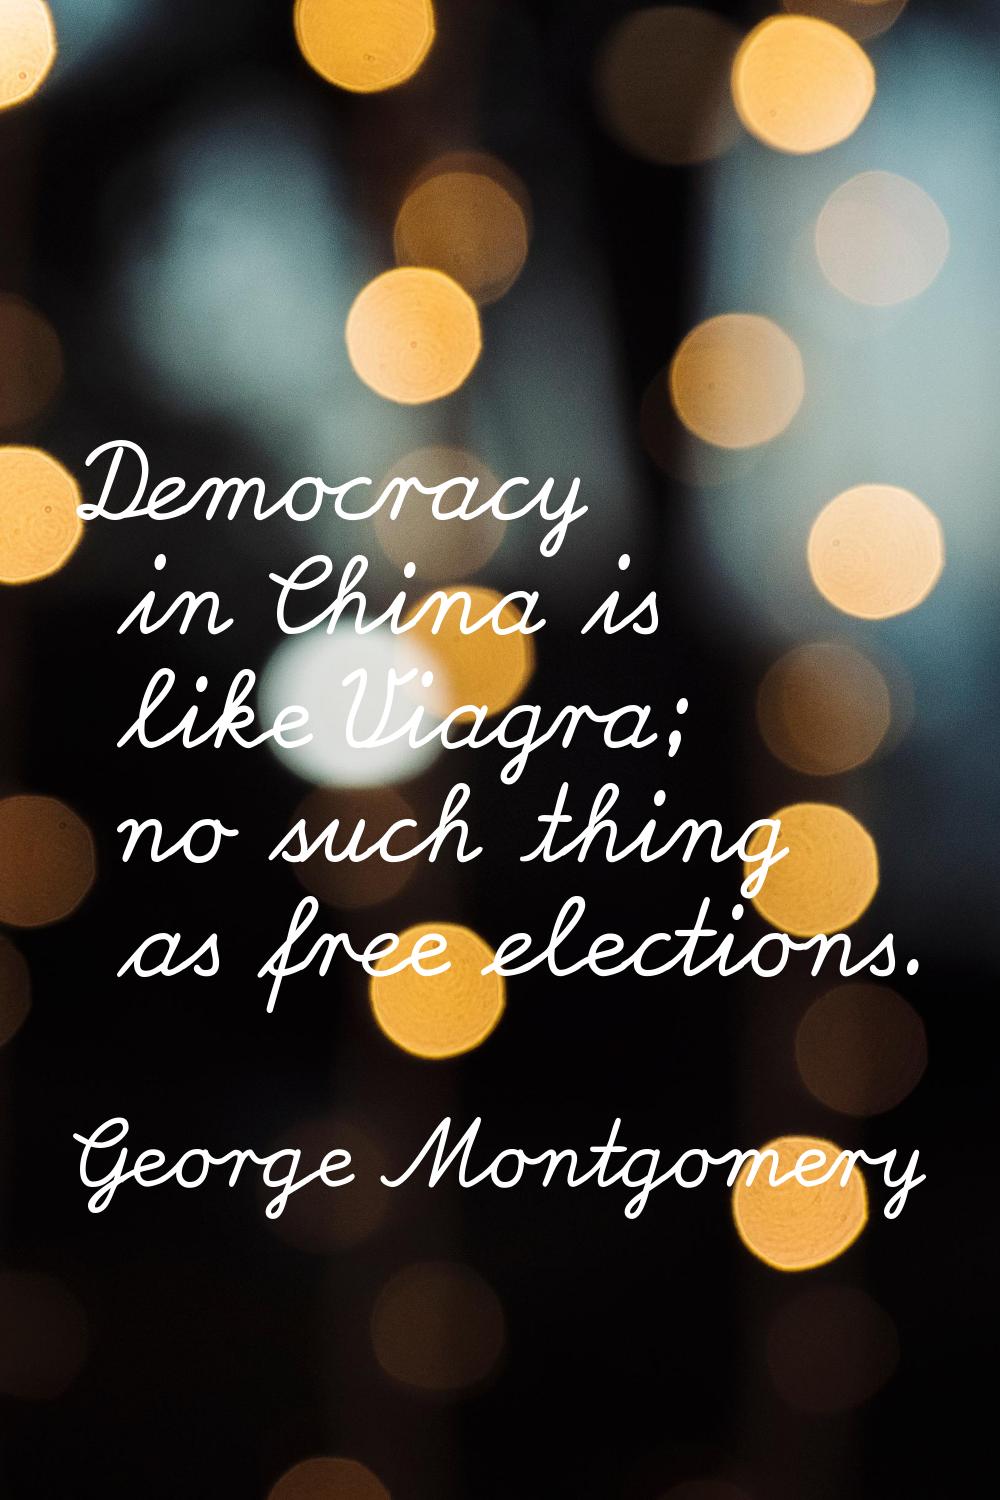 Democracy in China is like Viagra; no such thing as free elections.